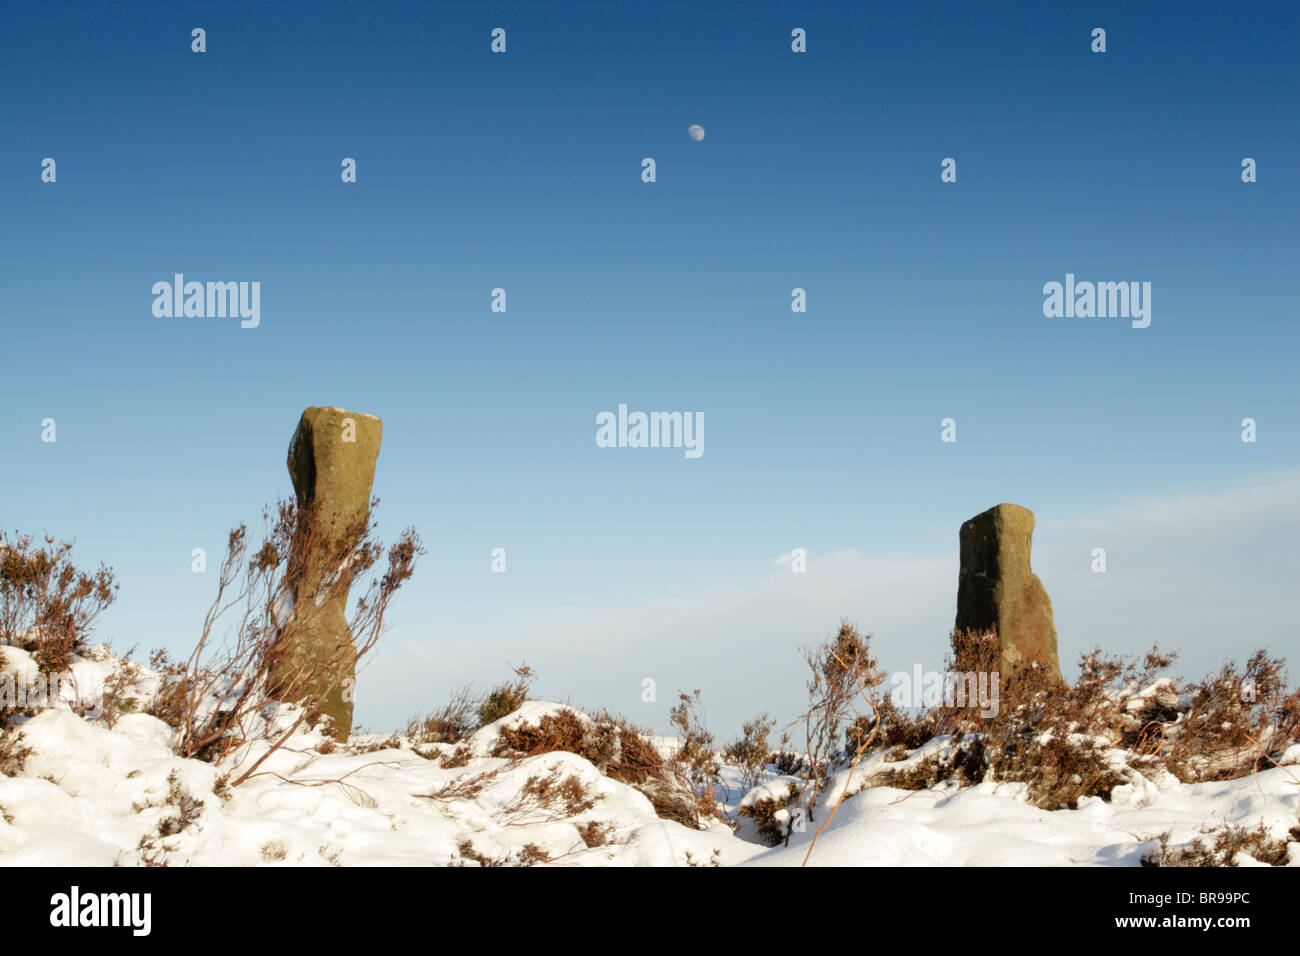 Weathered old stone posts in snow on Kildale Moor with the moon above against a blue sky in North York Moors national park Stock Photo